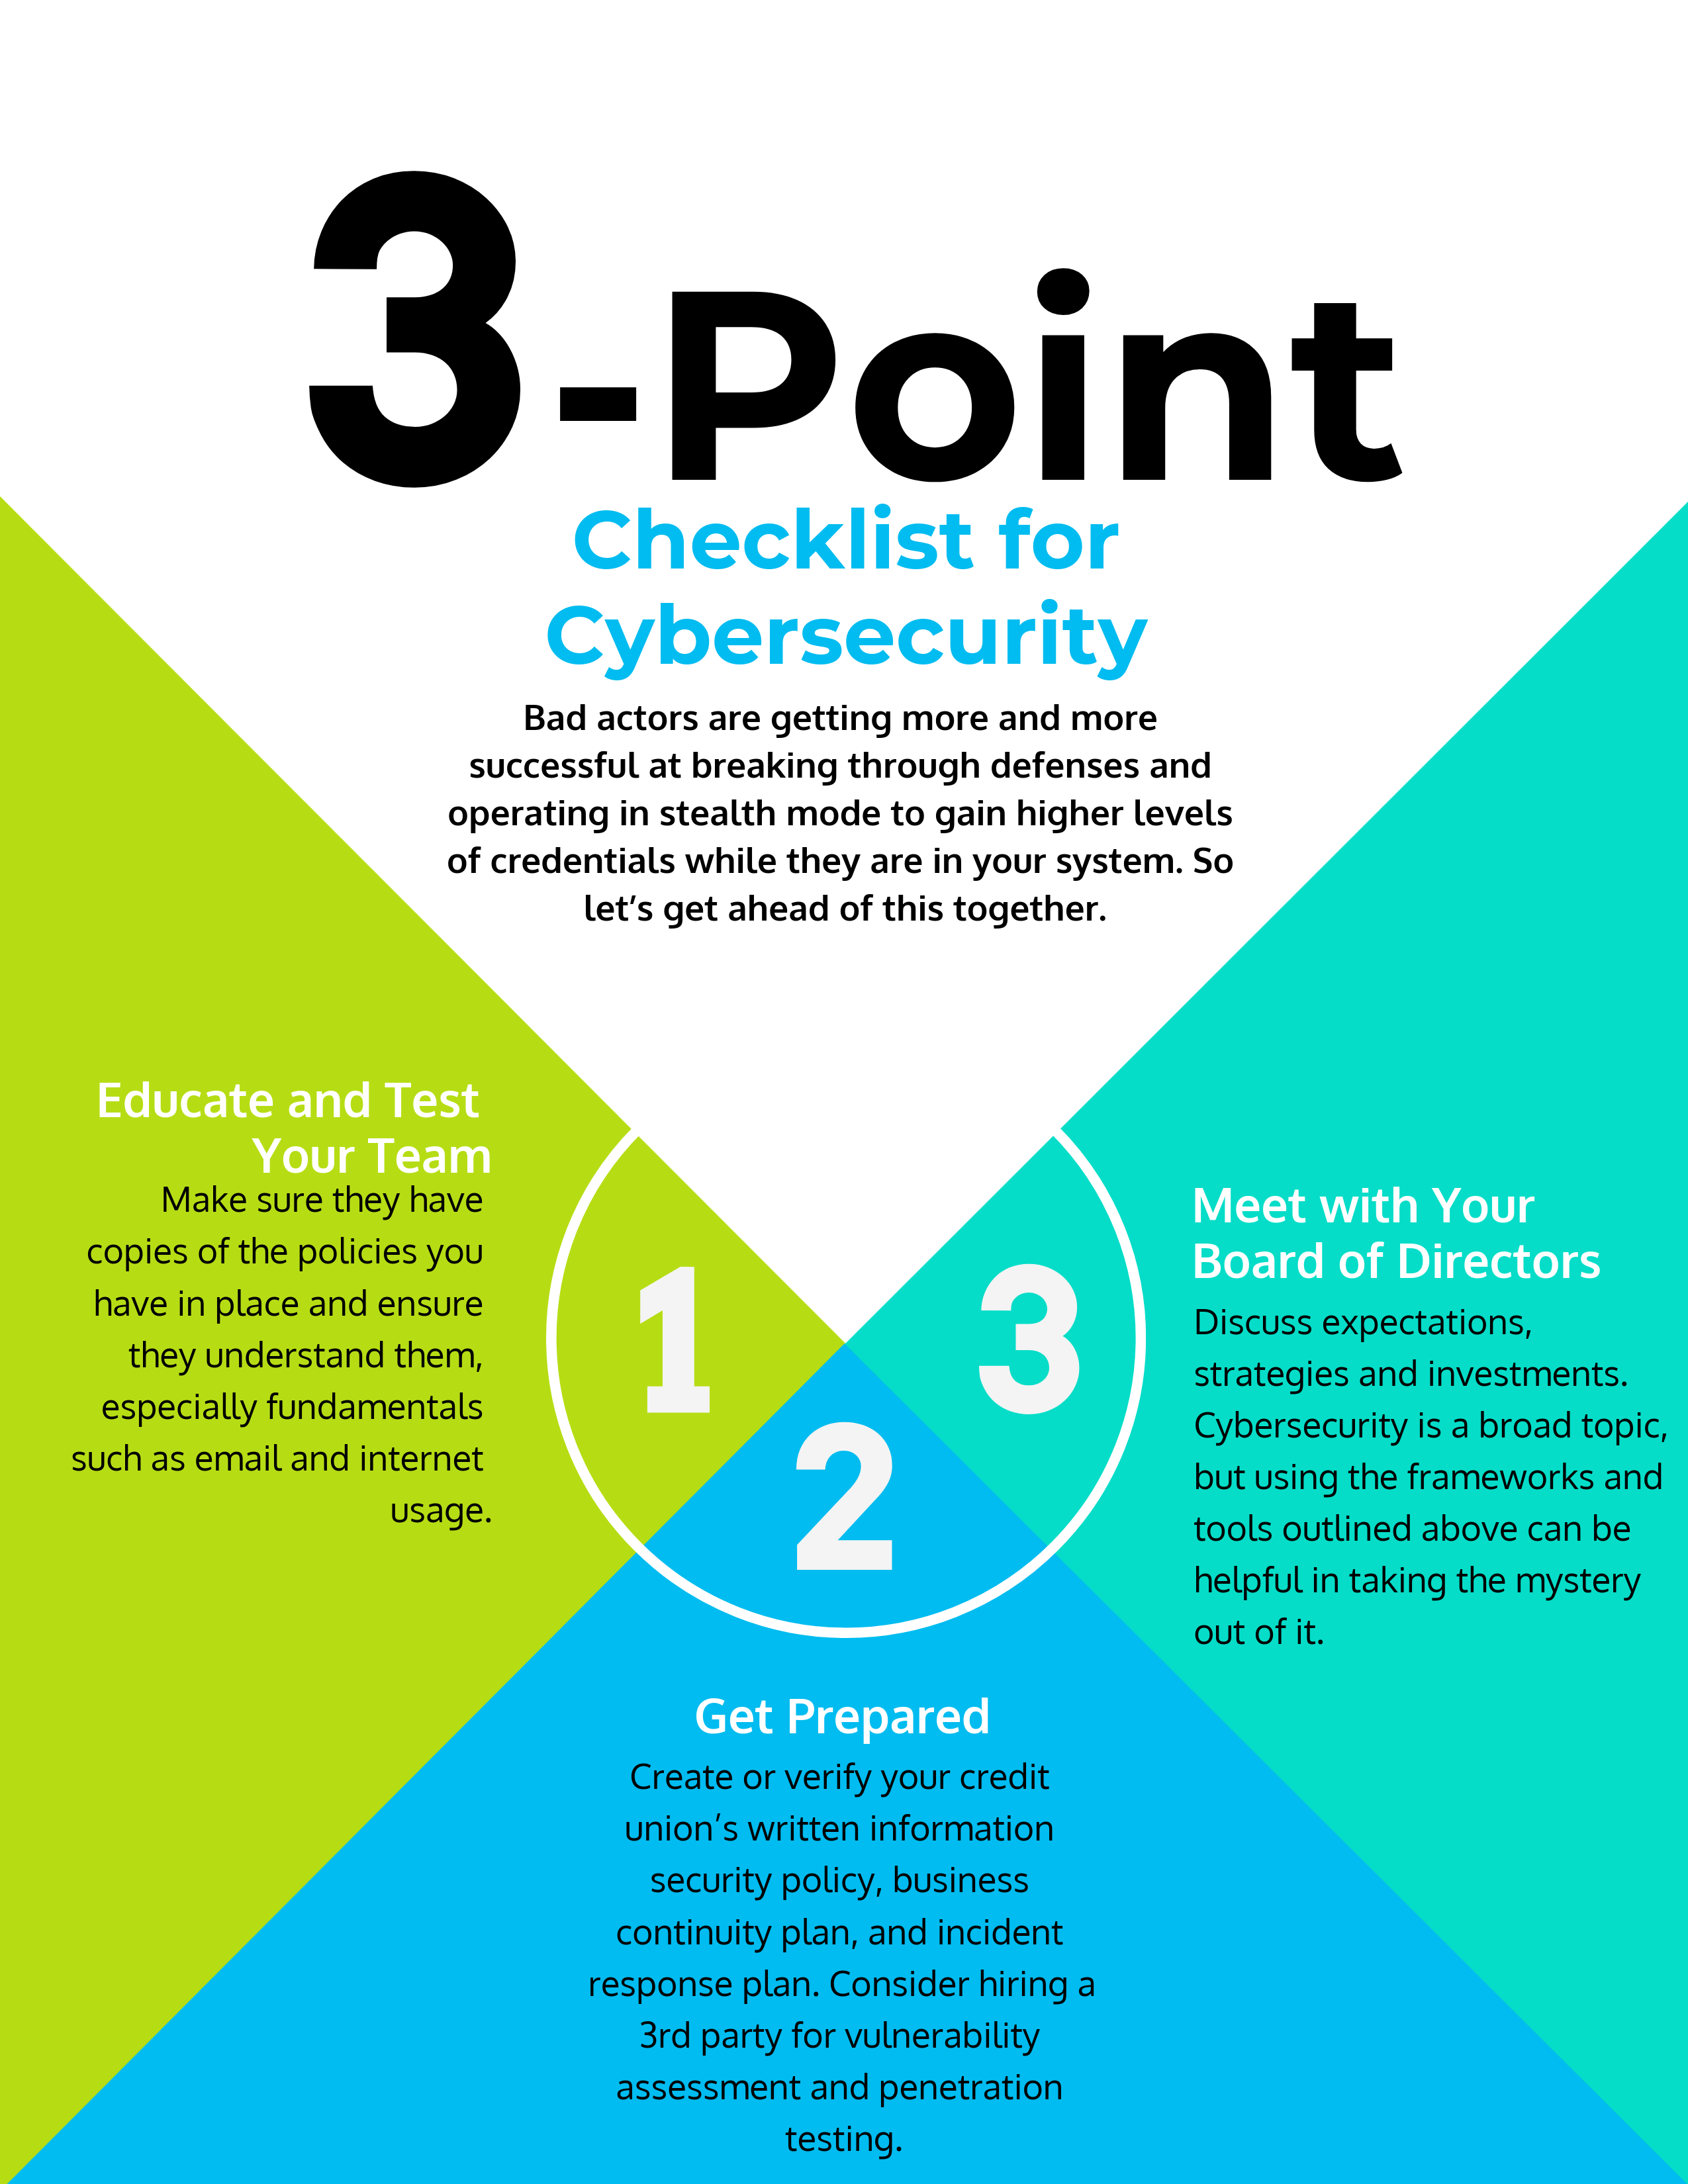 3-Point Checklist for Cybersecurity